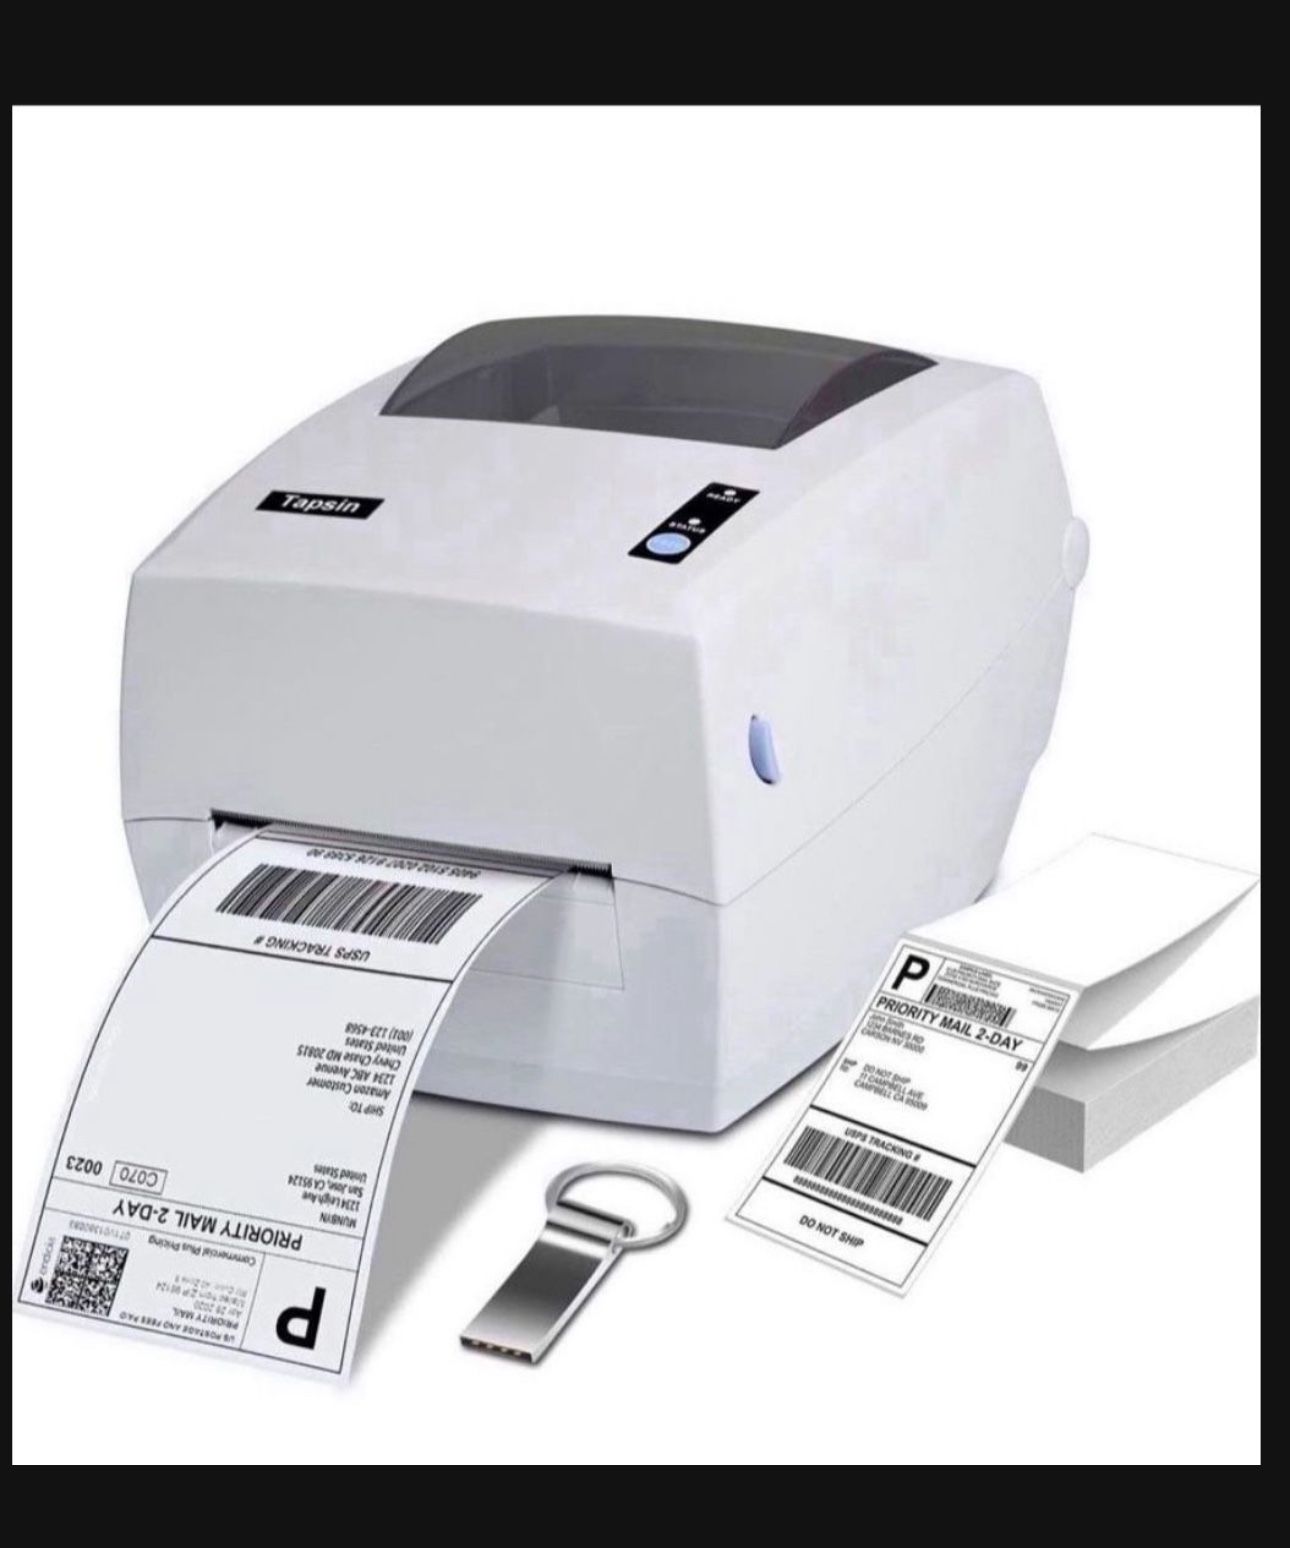 Shipping Label Printer, Tapsin Label Printer for Shipping Packages, 4x6 Thermal Printer for Shipping Labels, Compatible with Amazon, Ebay, Etsy, FedEx